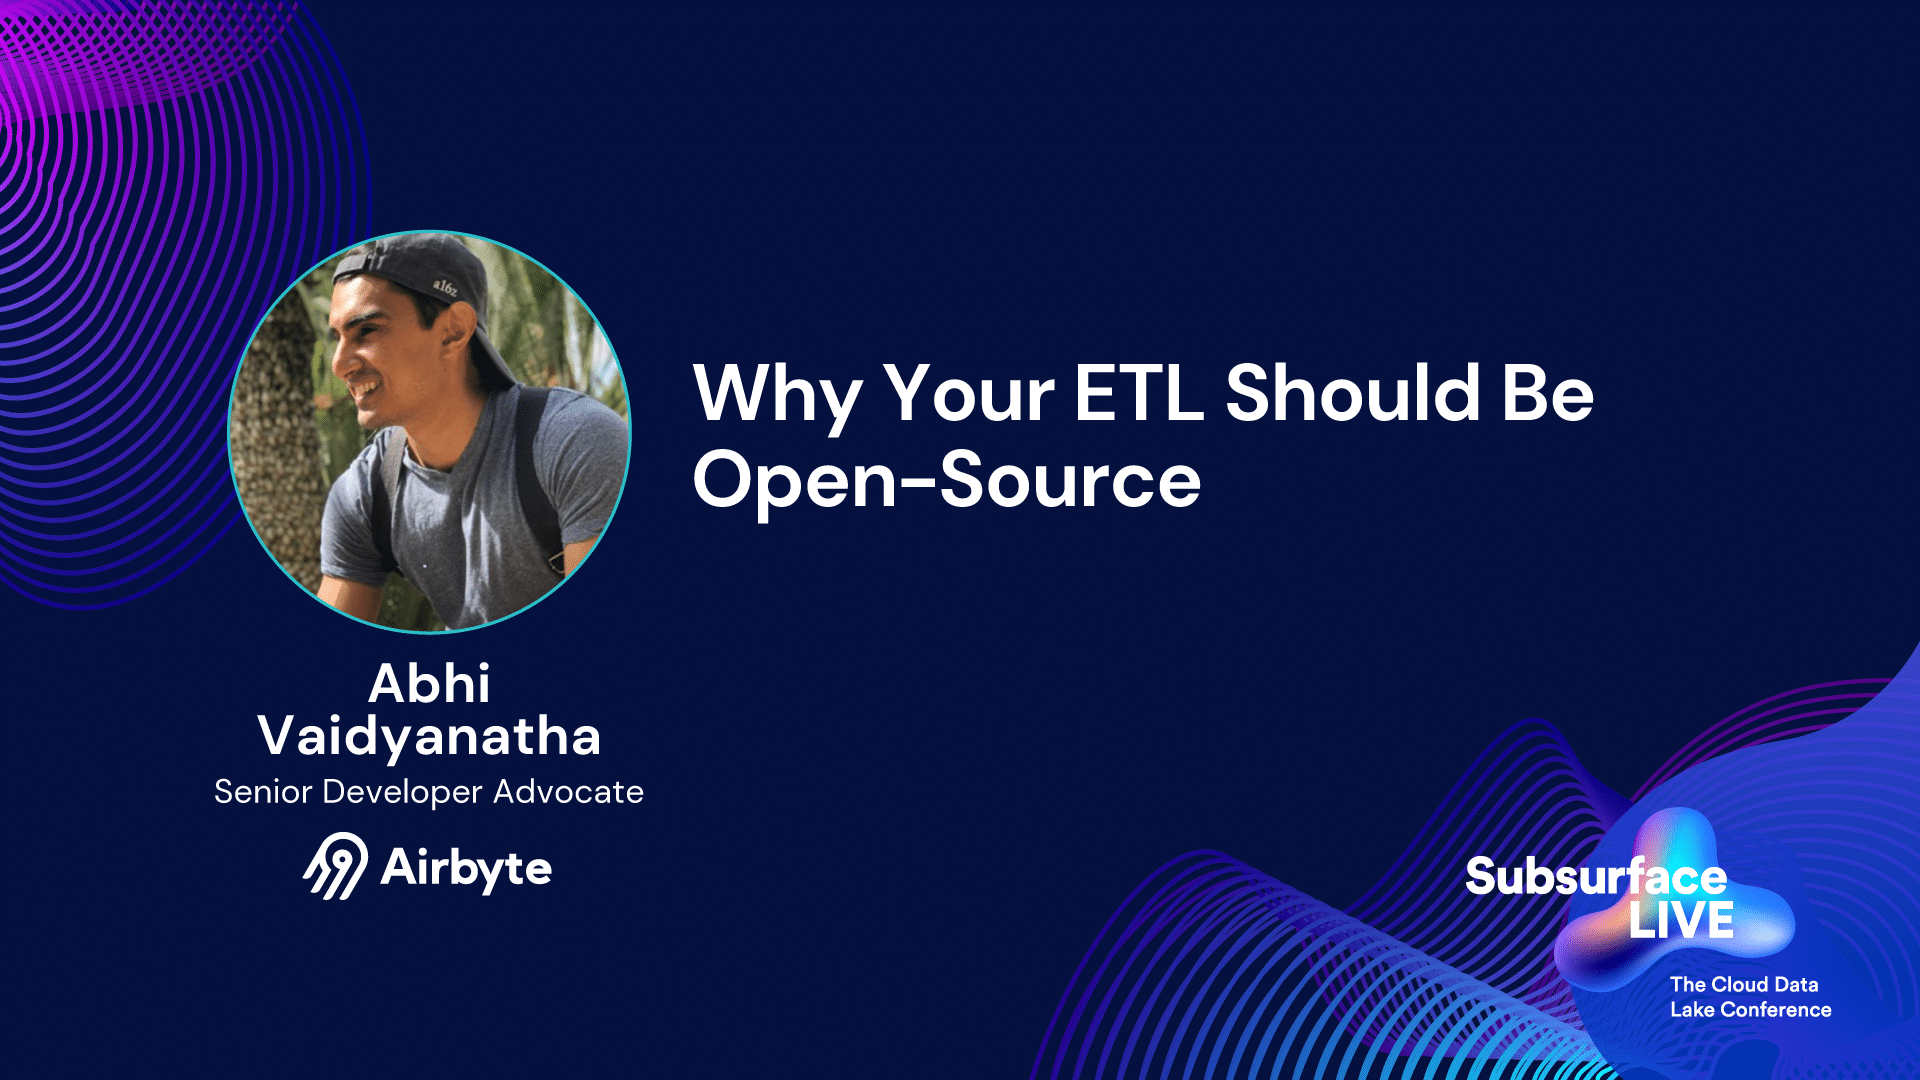 Why Your ETL Should Be Open-Source